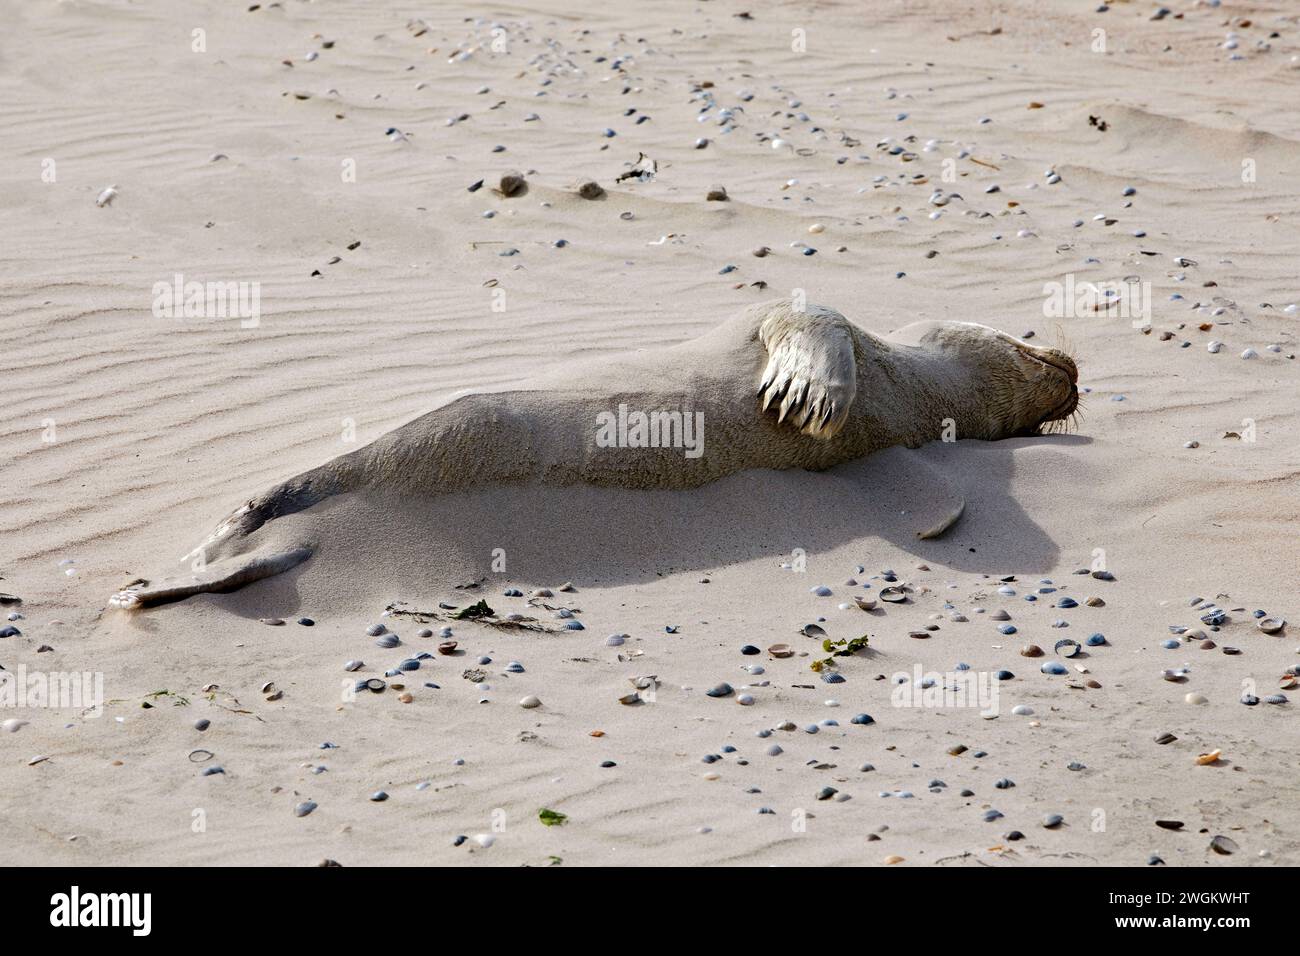 harbor seal, common seal (Phoca vitulina), dead seal on the beach, Germany, Lower Saxony, Norderney Stock Photo